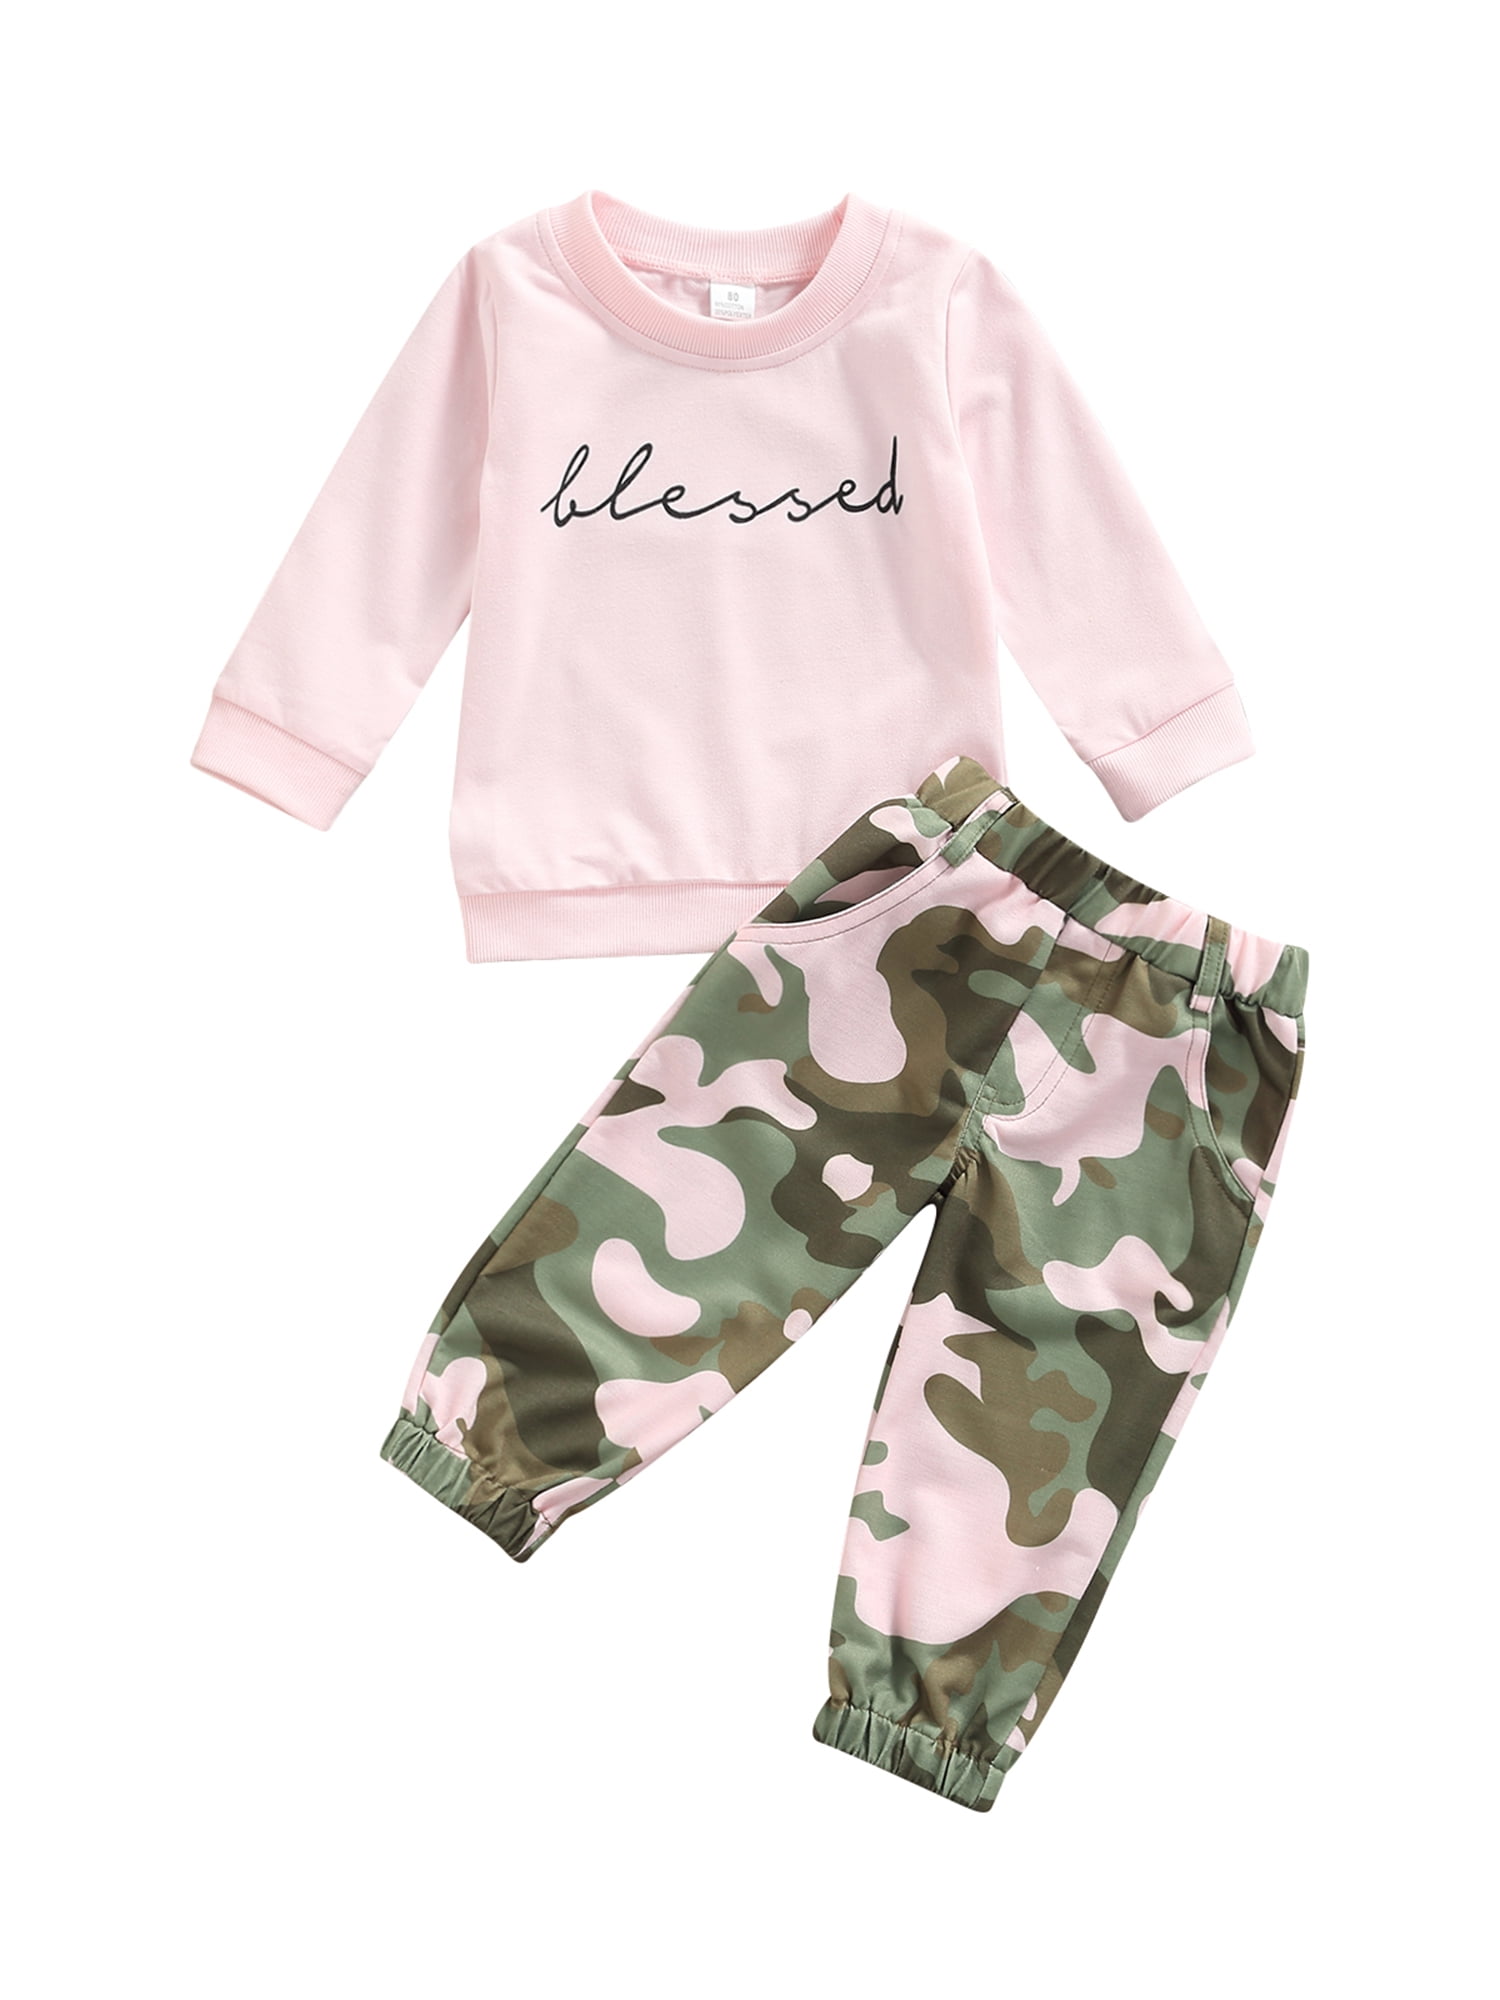 Toddler Kids Baby Girl Pink Camo Long Sleeve Tops Pants Tracksuit Outfits Set 